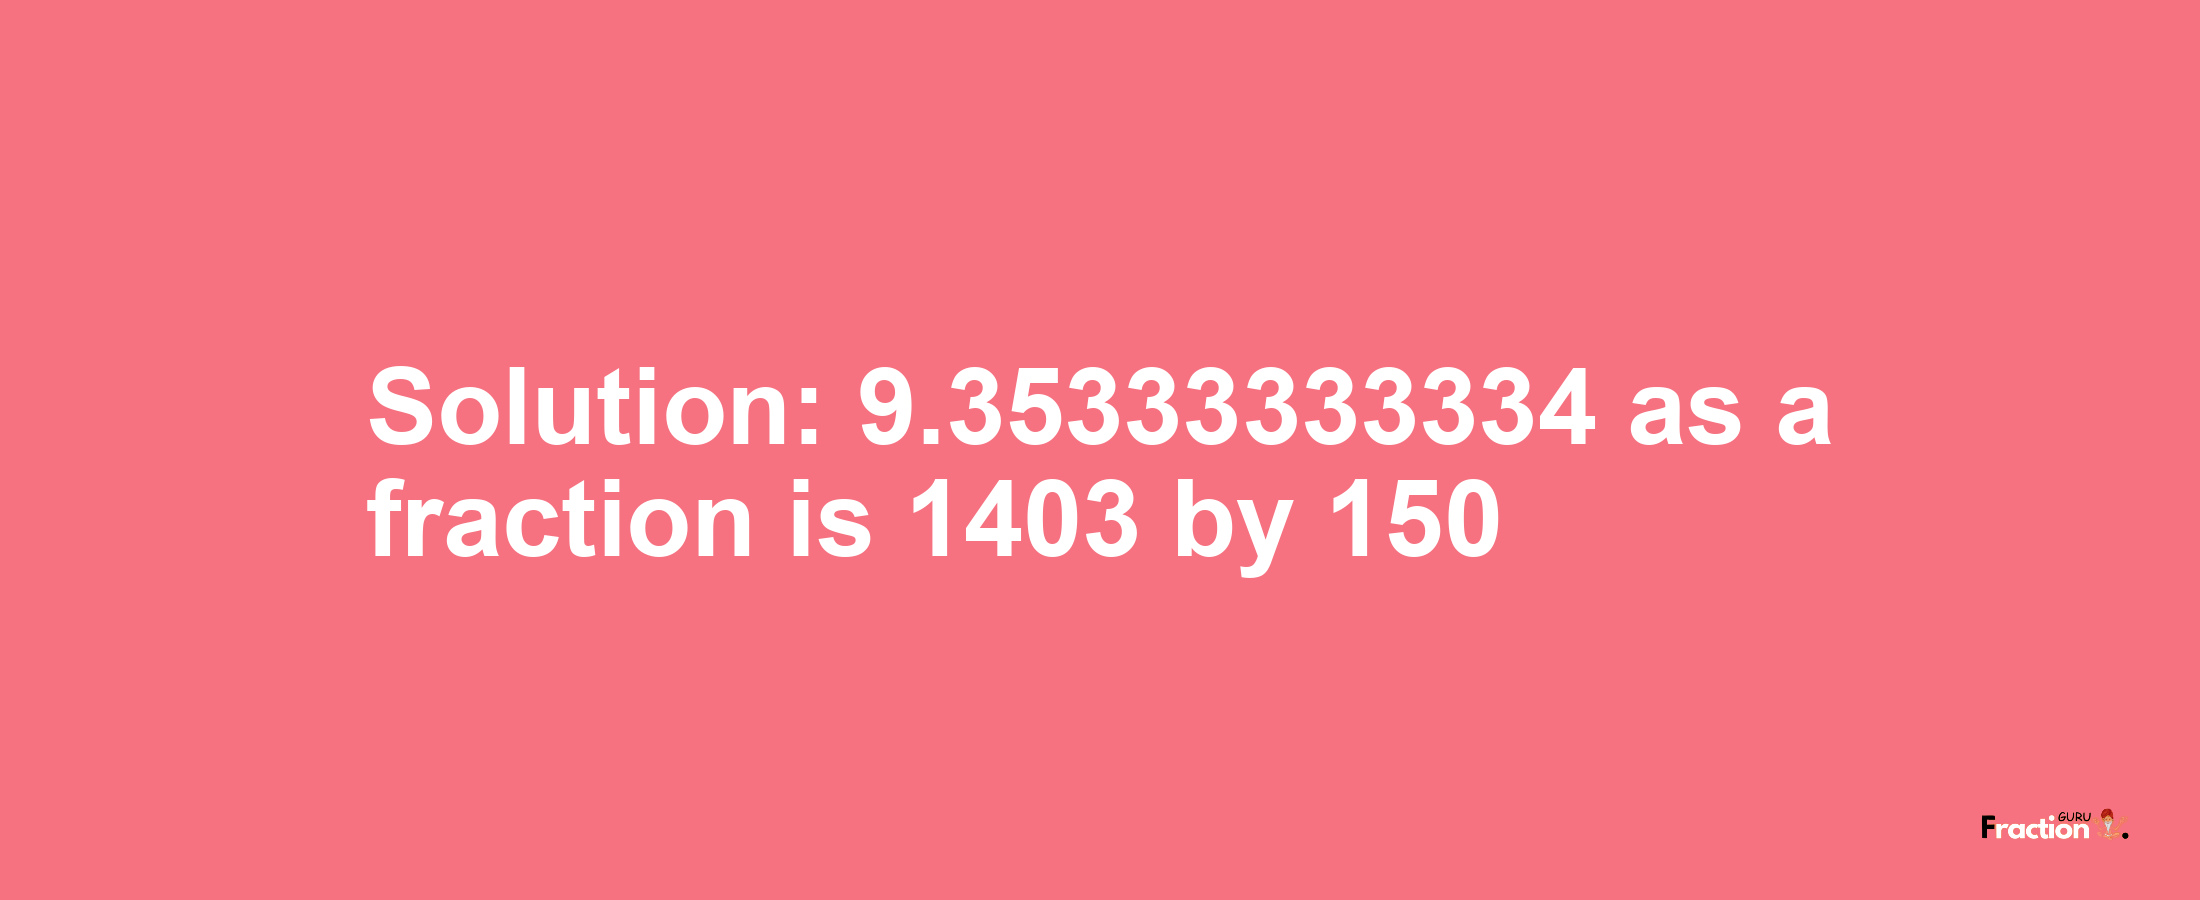 Solution:9.35333333334 as a fraction is 1403/150